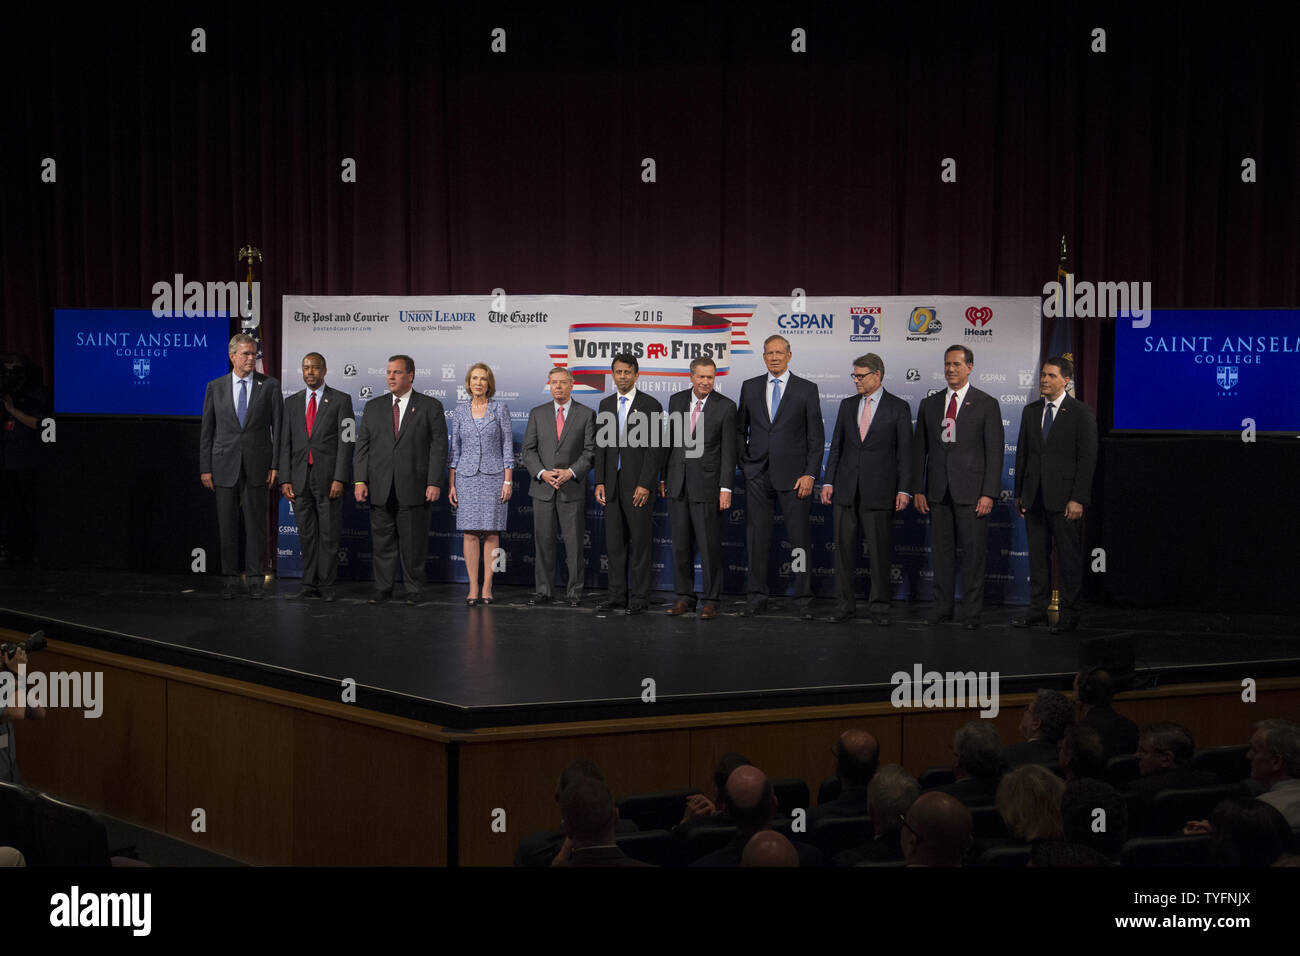 Republican presidential candidates, from left to right, Jeb Bush, Ben Carson, Gov. Chris Christie (R-NJ), Carly Fiorina, Sen. Lindsey Graham (R-NC), Gov. Bobby Jindal (R-LA), Gov. John Kasich (R-OH), George Pataki, Rick Perry, Rick Santorum and Gov. Scott Walker (R-WI), arrive on stage for the Voters First forum at St. Anselm College in Manchester, New Hampshire on August 3, 2015. Fourteen Republican presidential candidates, excluding Donald Trump, participated in the forum which kicked off the Presidential debate schedule for the 2016 presidential election. Photo by Matthew Healey/UPI Stock Photo